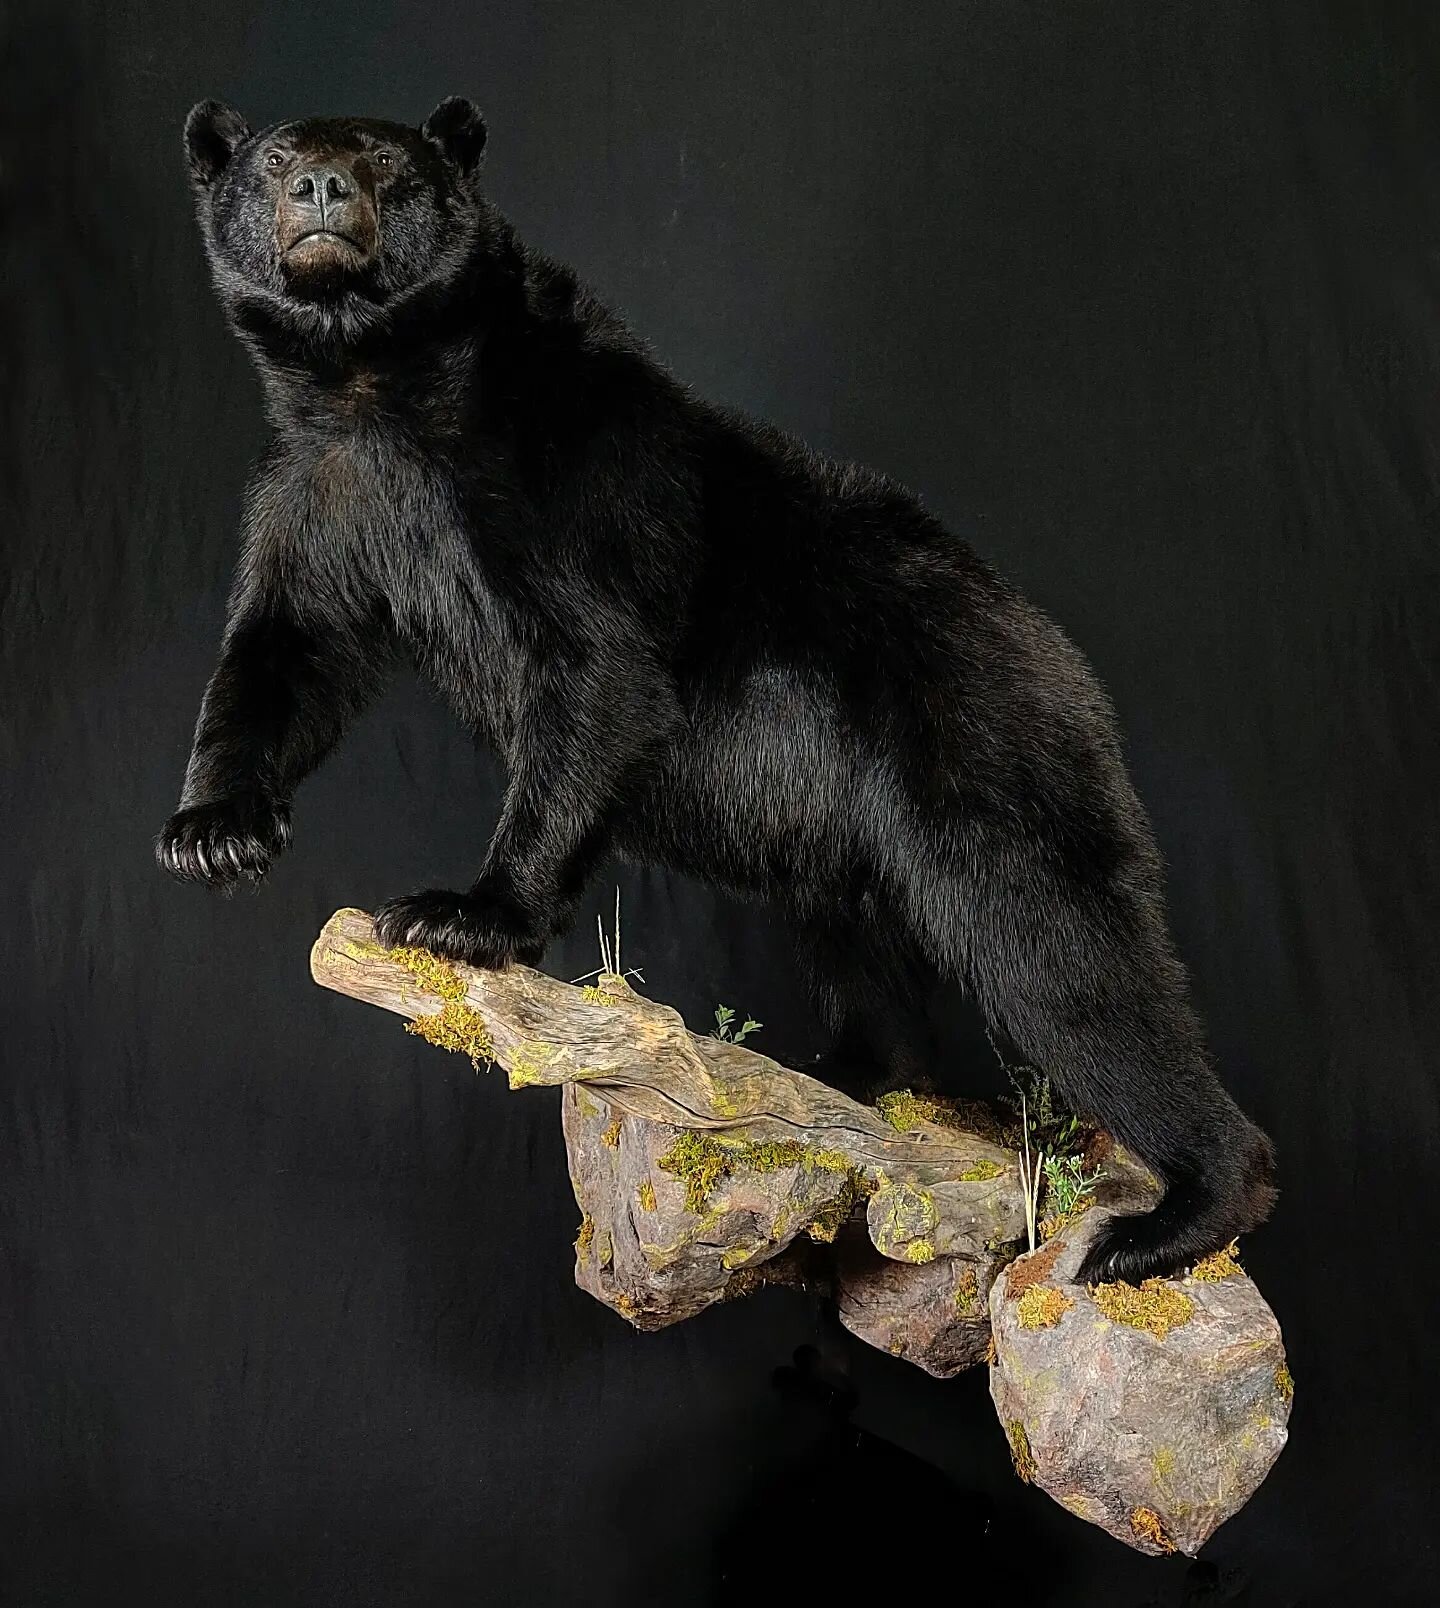 Brute of an Idaho bear we just finished up. Pictures dont do this bear  justice. #taxidermytuesday #taxidermy #lifesize #lifesizetaxidermy #bear #bearhunting #blackbear #idahotaxidermy #predator #predatorhunting #biggame #biggamehunting #biggametaxid